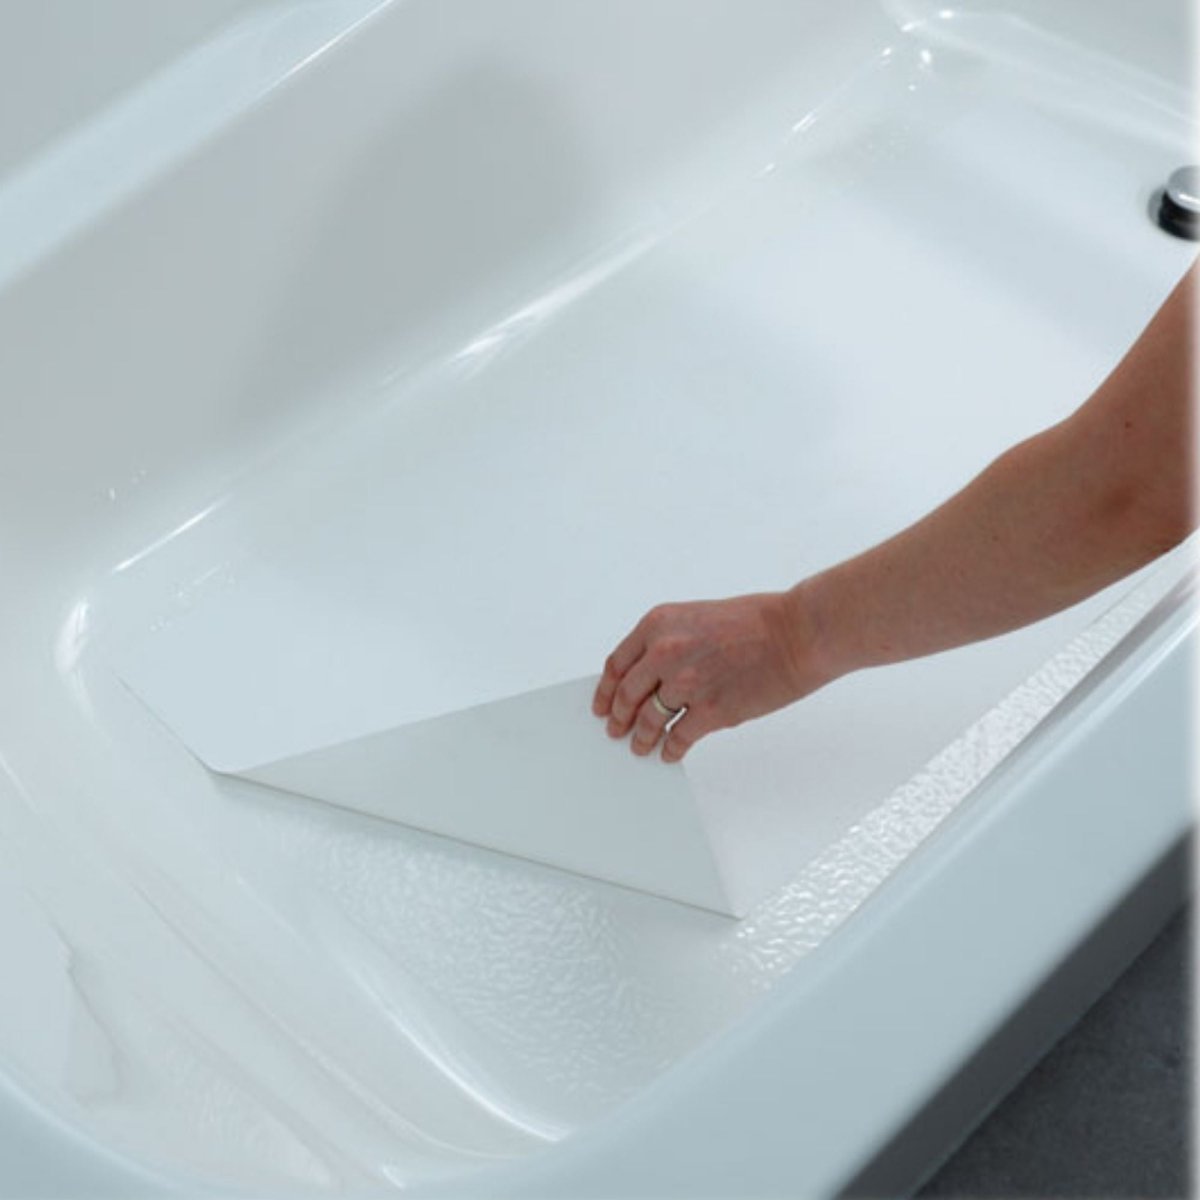 https://cdn.shopify.com/s/files/1/0619/6307/5793/products/ultra-thin-non-slip-adhesive-bath-mat-free-roller-presser-included-sa077-555372.jpg?v=1689691374&width=1200